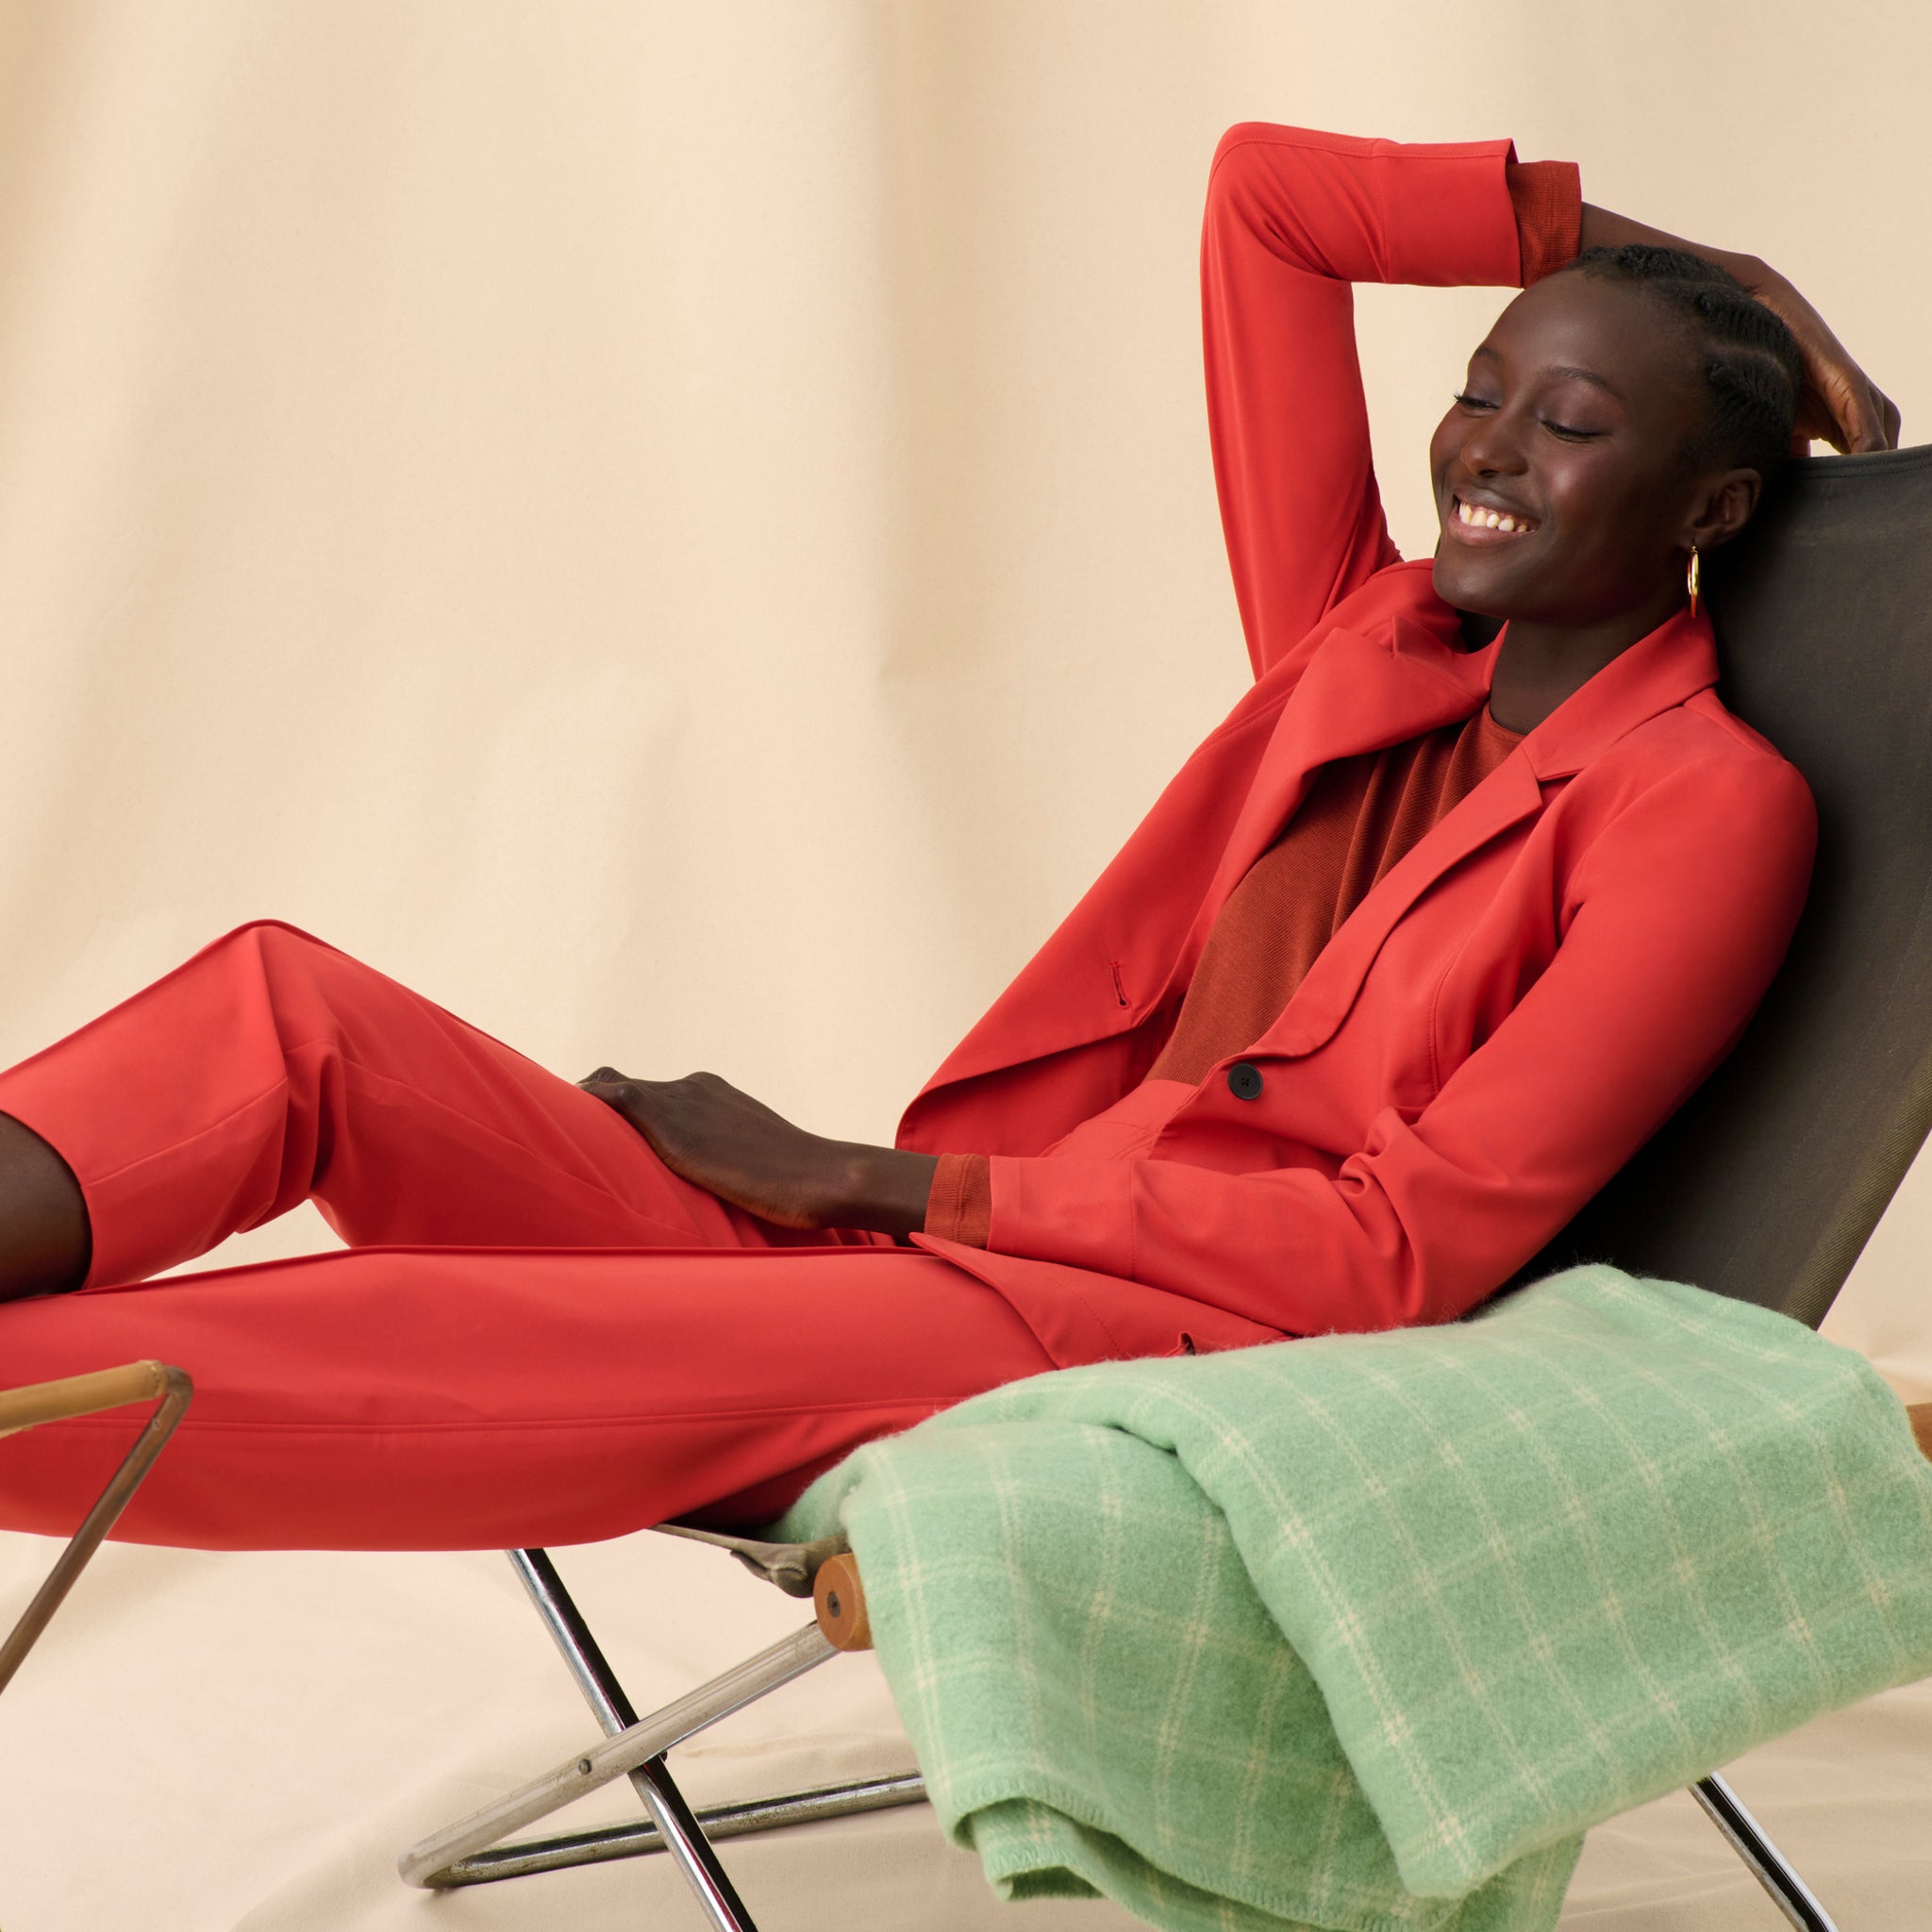 Front image of a woman wearing the Colby Pant in Blood Orange